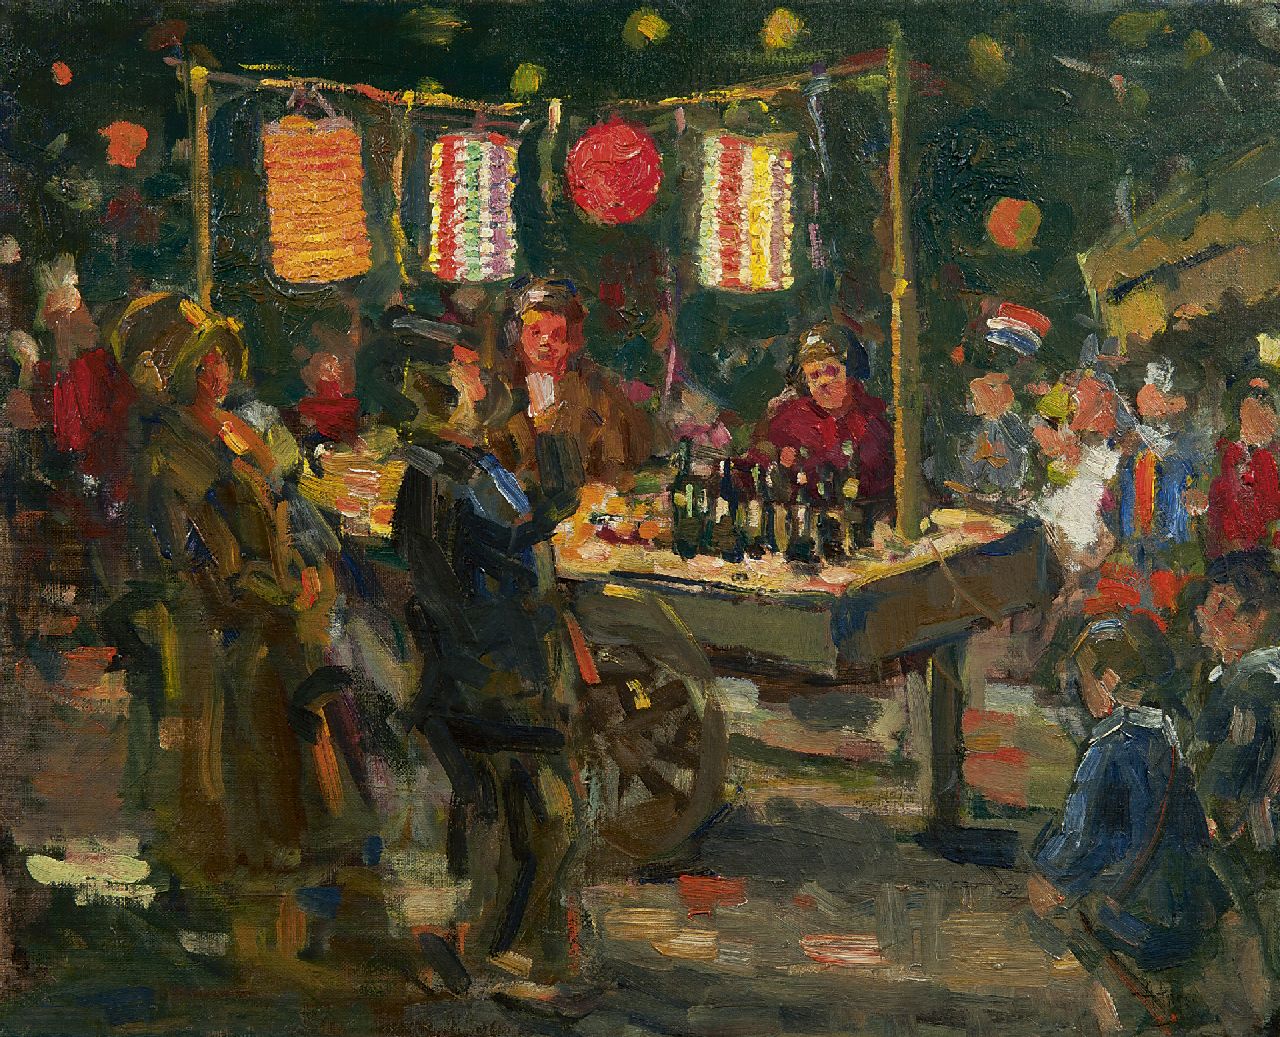 Fresco A.  | Abraham Fresco, Market stall with Chinese Lanterns, oil on canvas 40.2 x 49.8 cm, signed l.r.